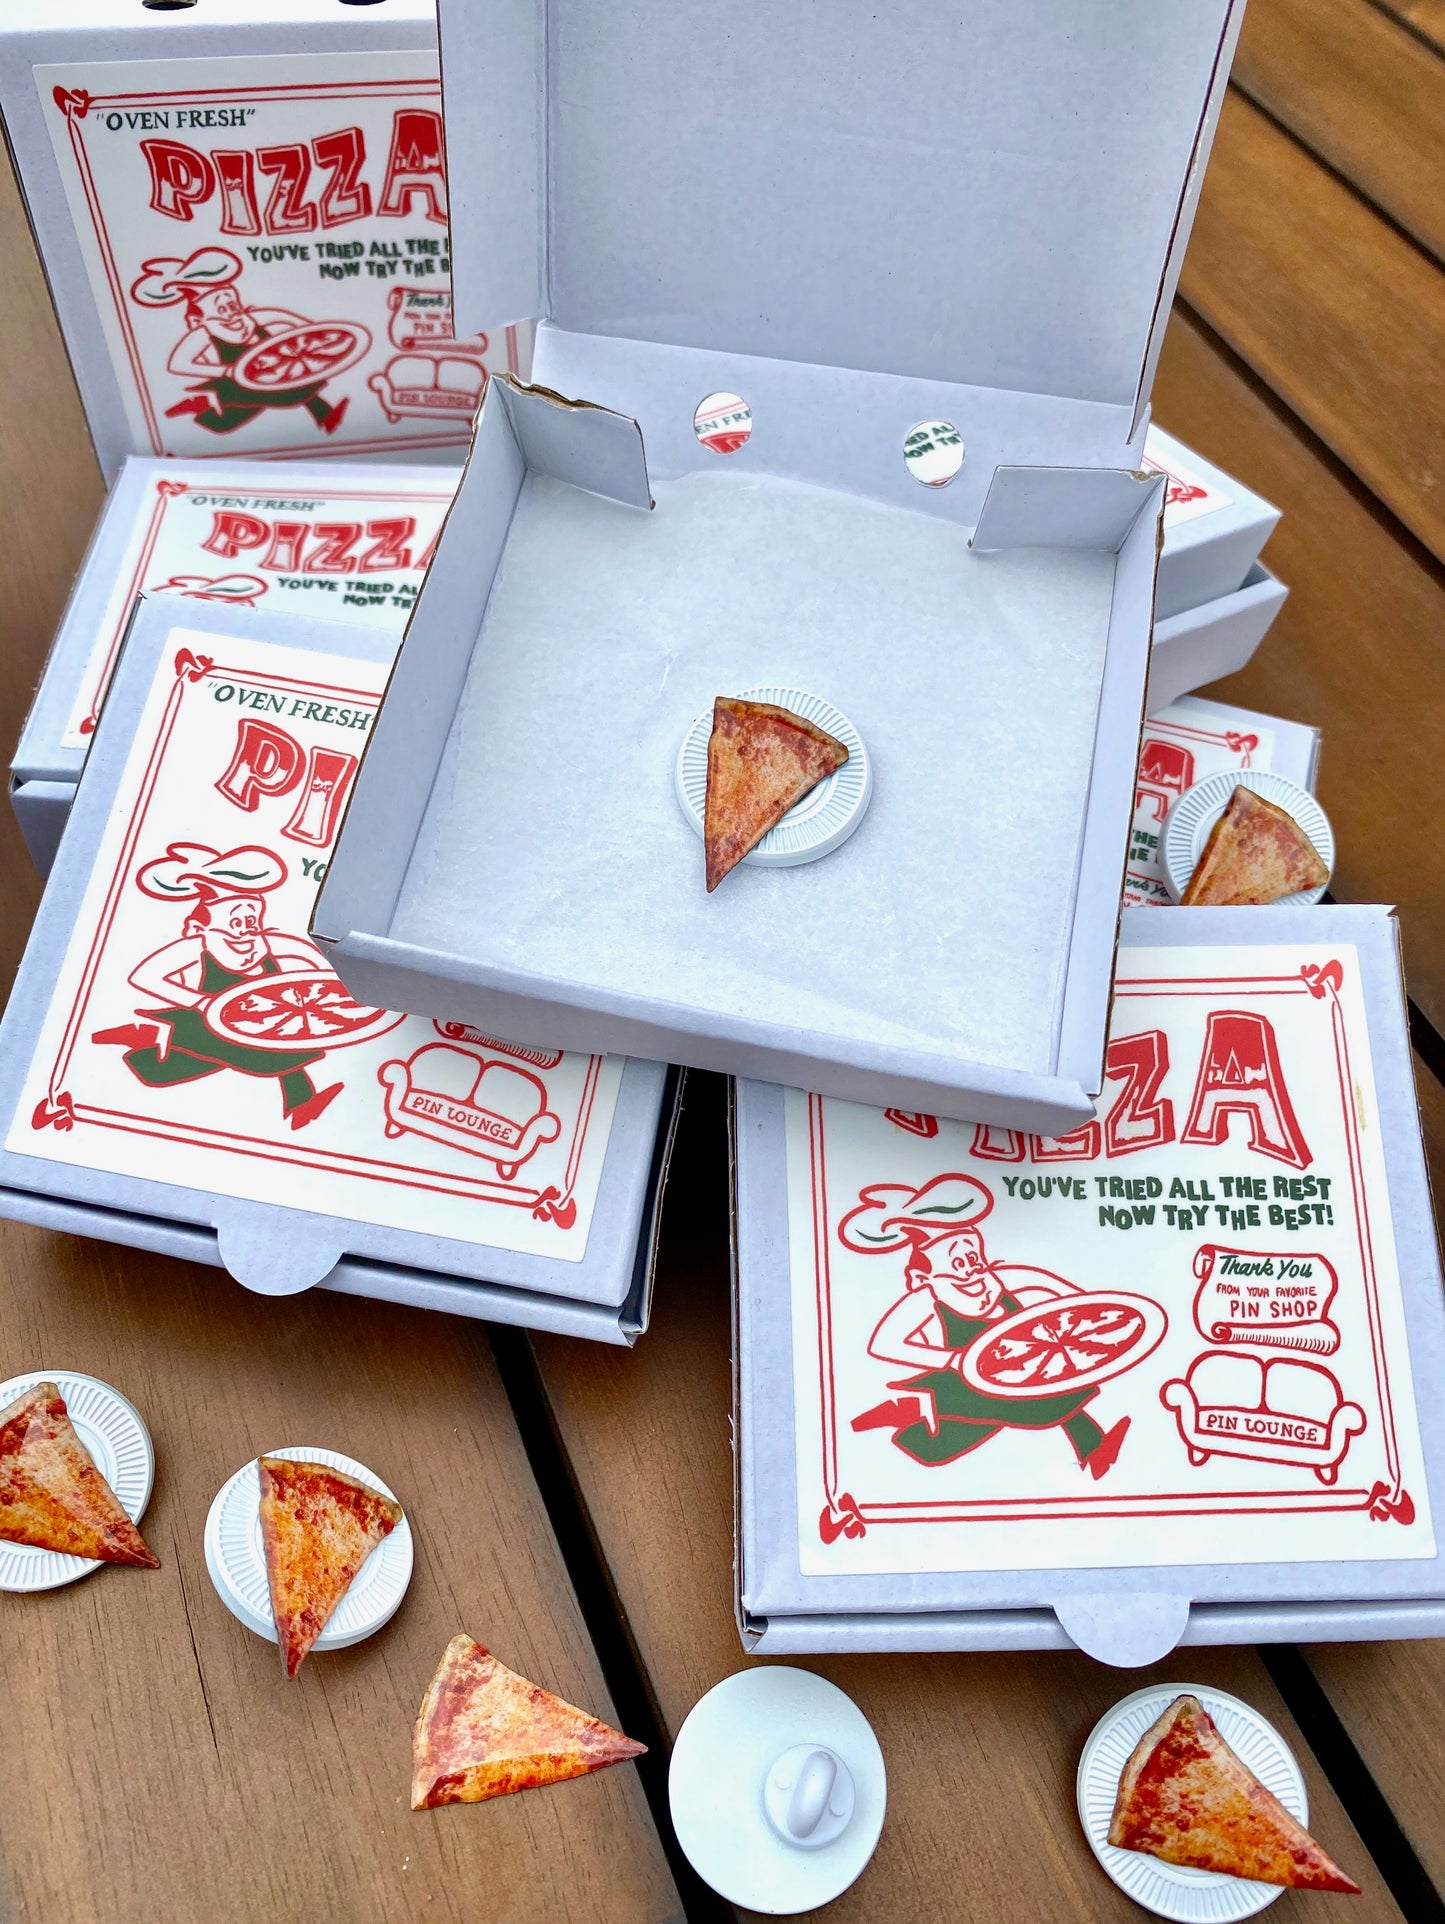 Real Slice of Pizza Pin and Pizza Box (Magnetic)